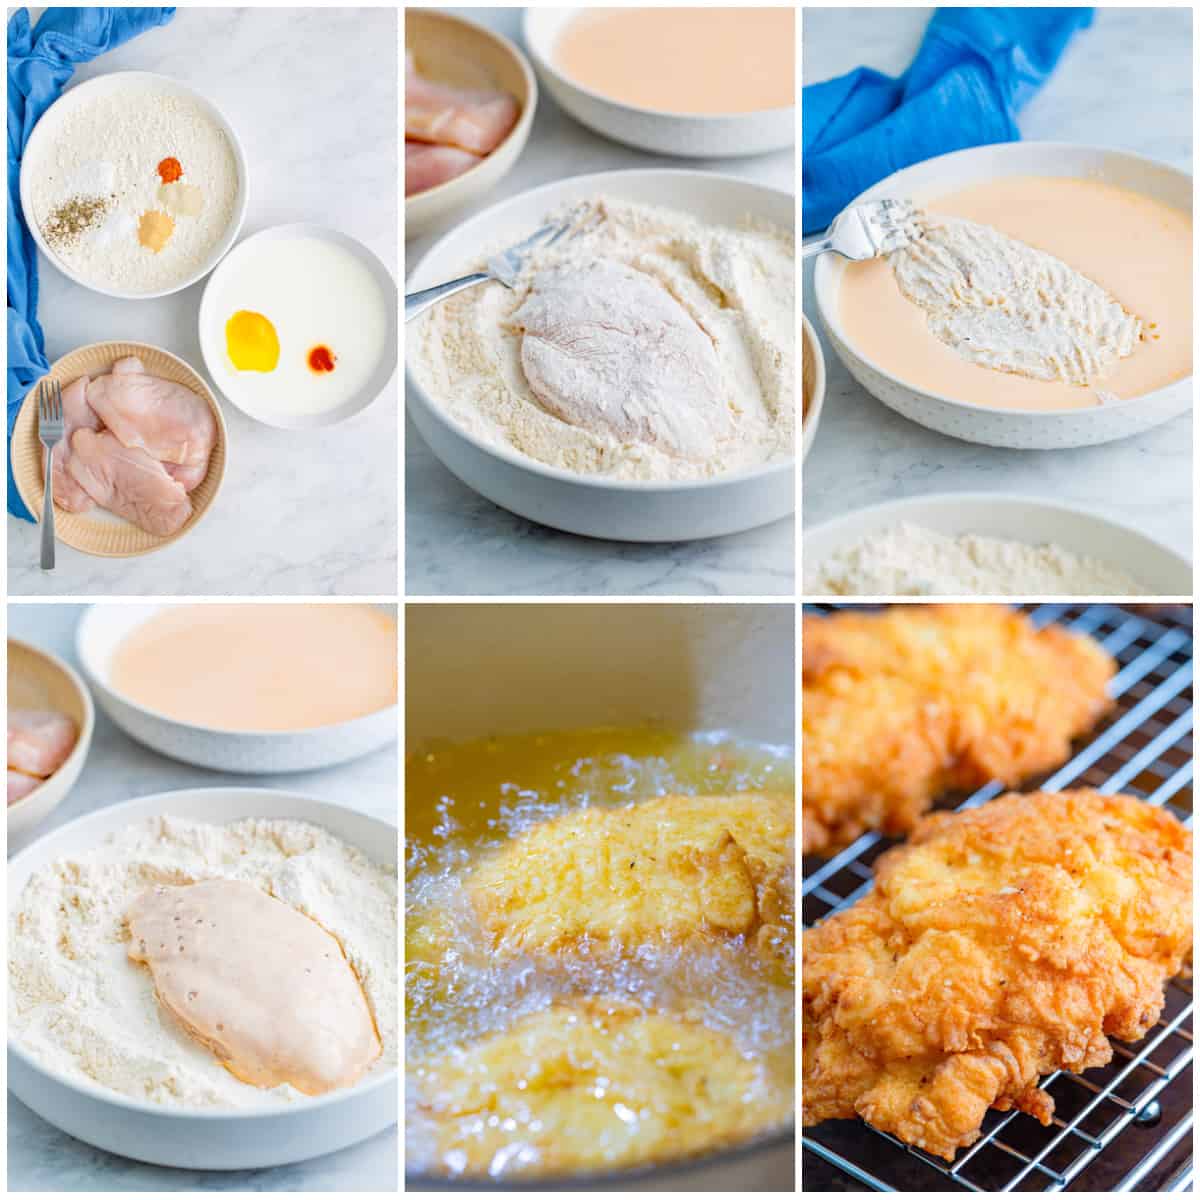 Step by step photos on how to make a Crispy Chicken Sandwich